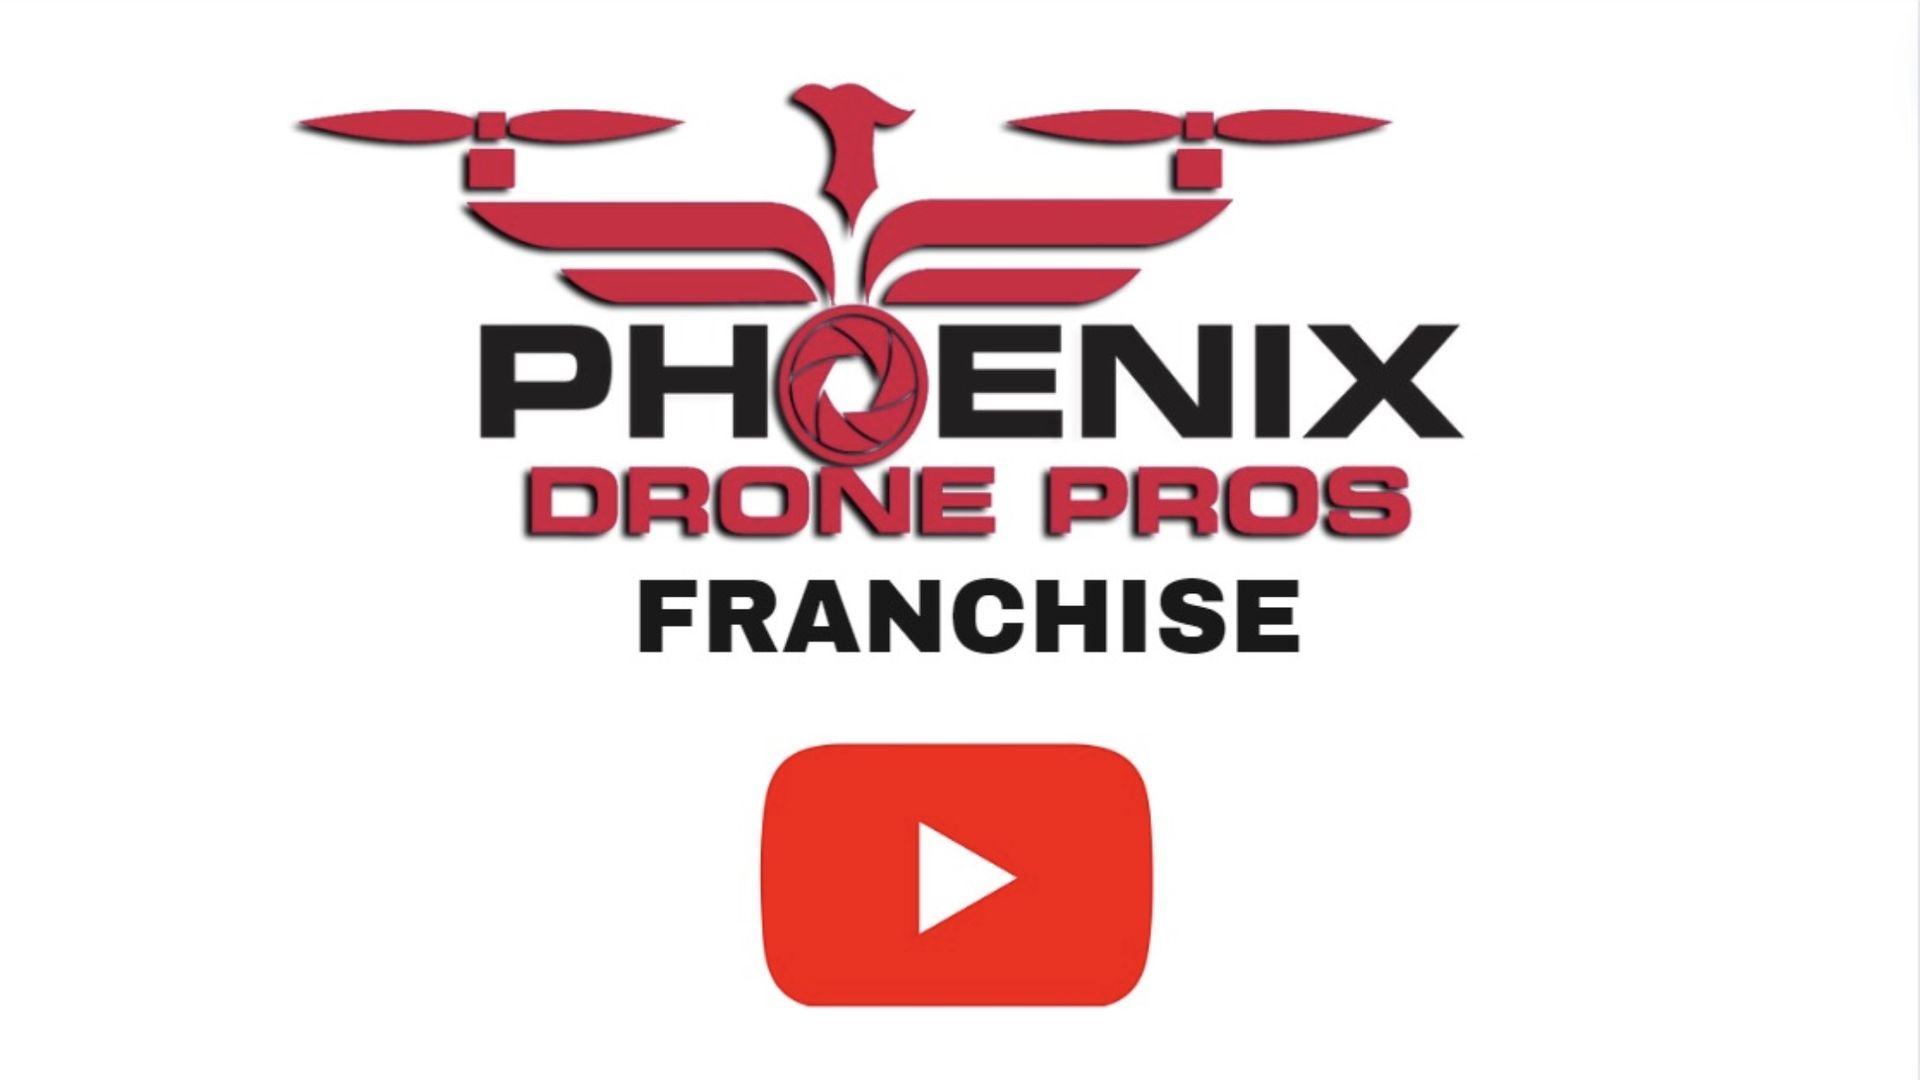 A logo for phoenix drone pros franchise with a play button. Photo by Phoenix Drone Pros, Robert Biggs